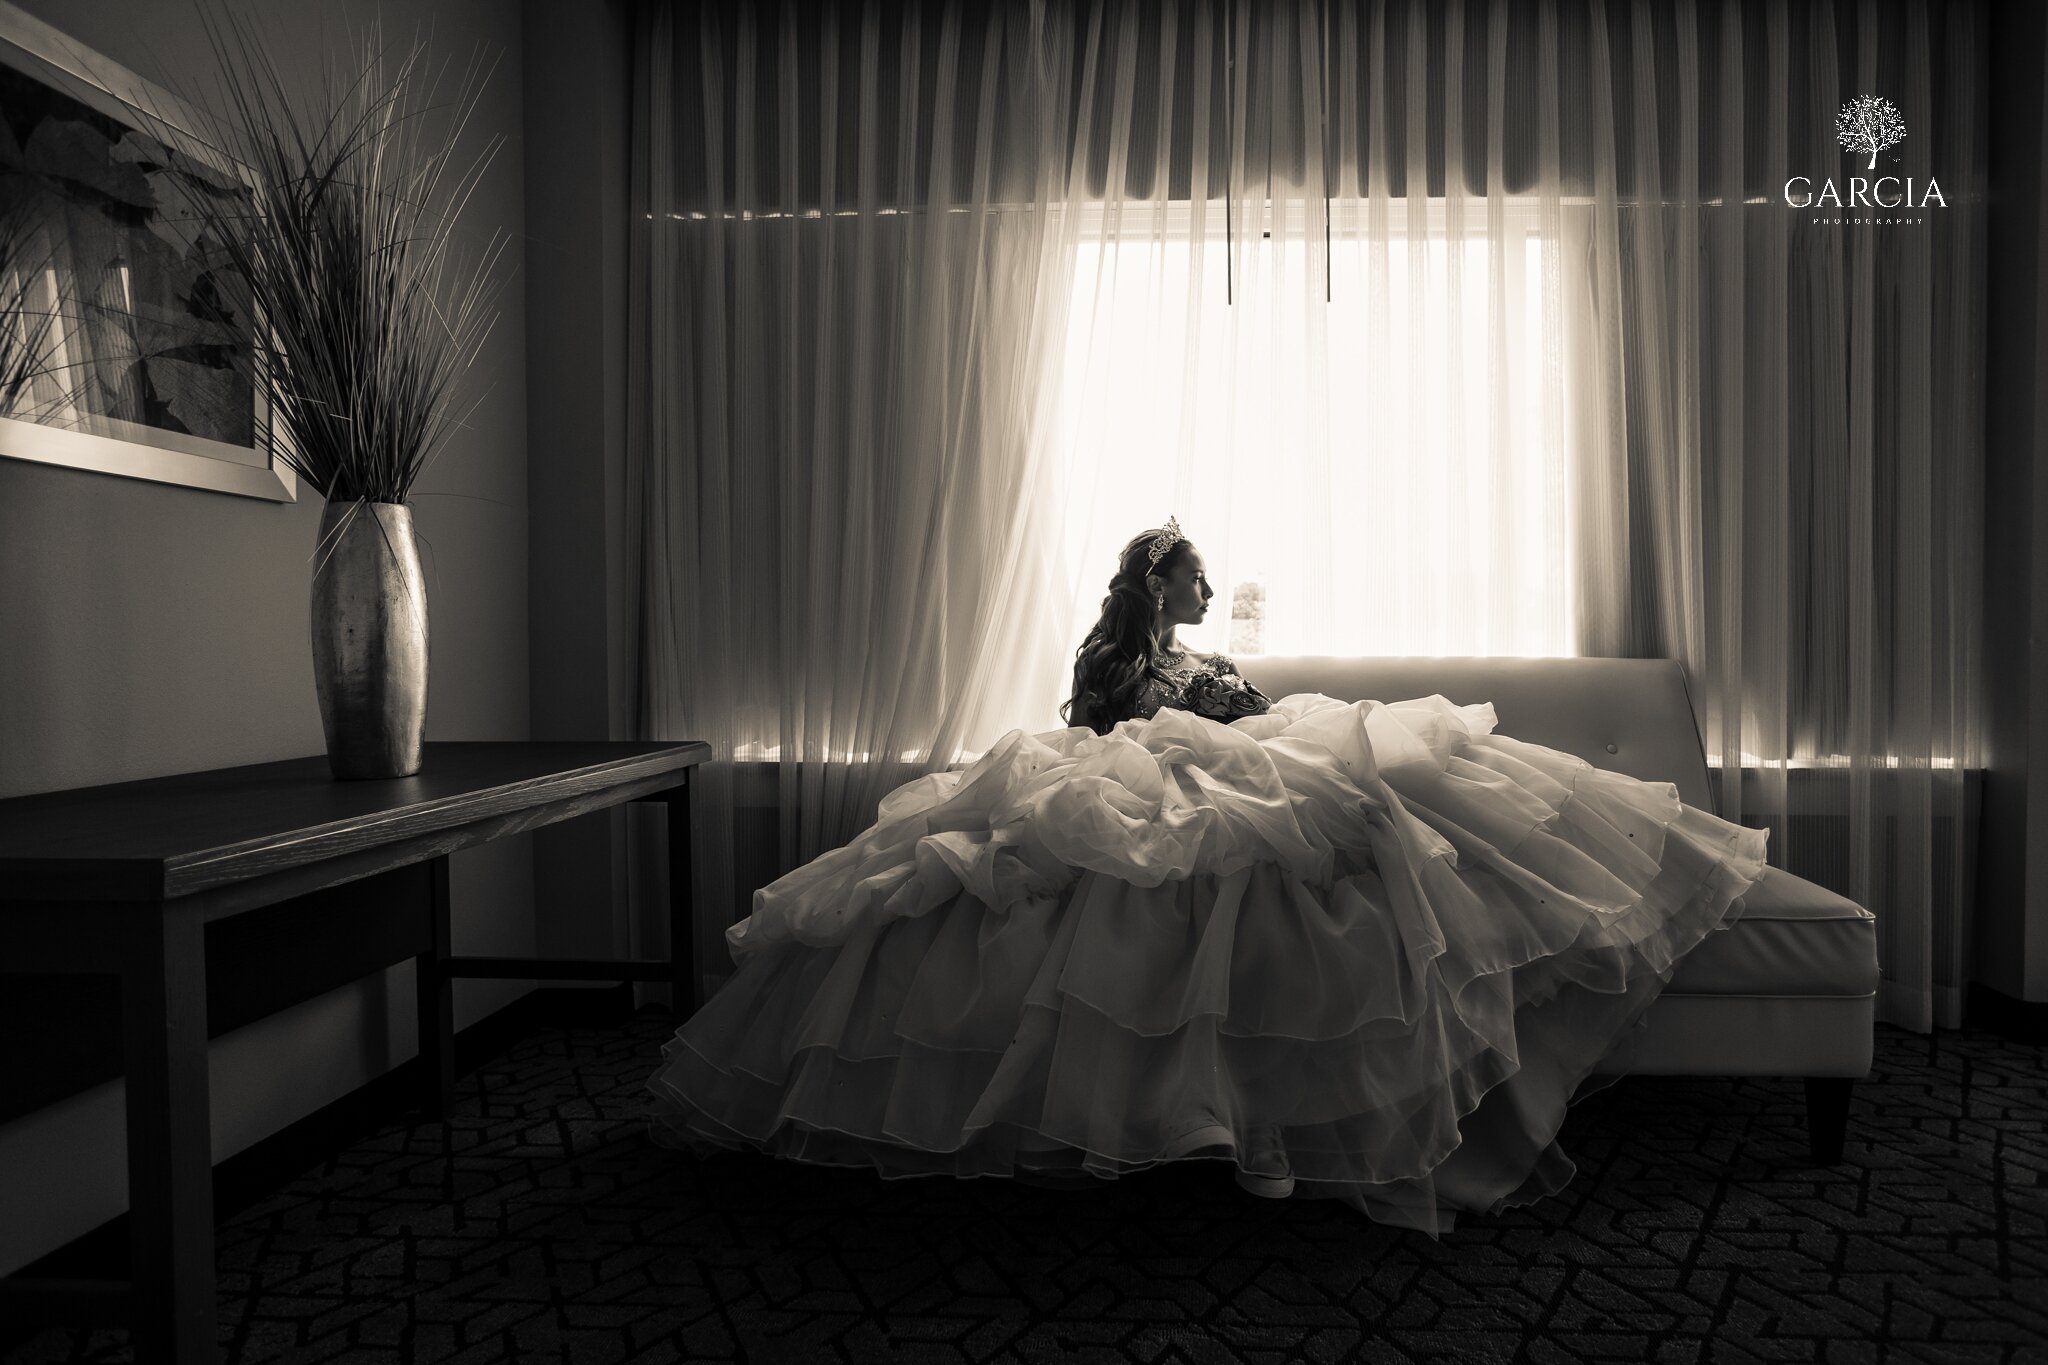 Taylor-Quince-Garcia-Photography-0185.jpg